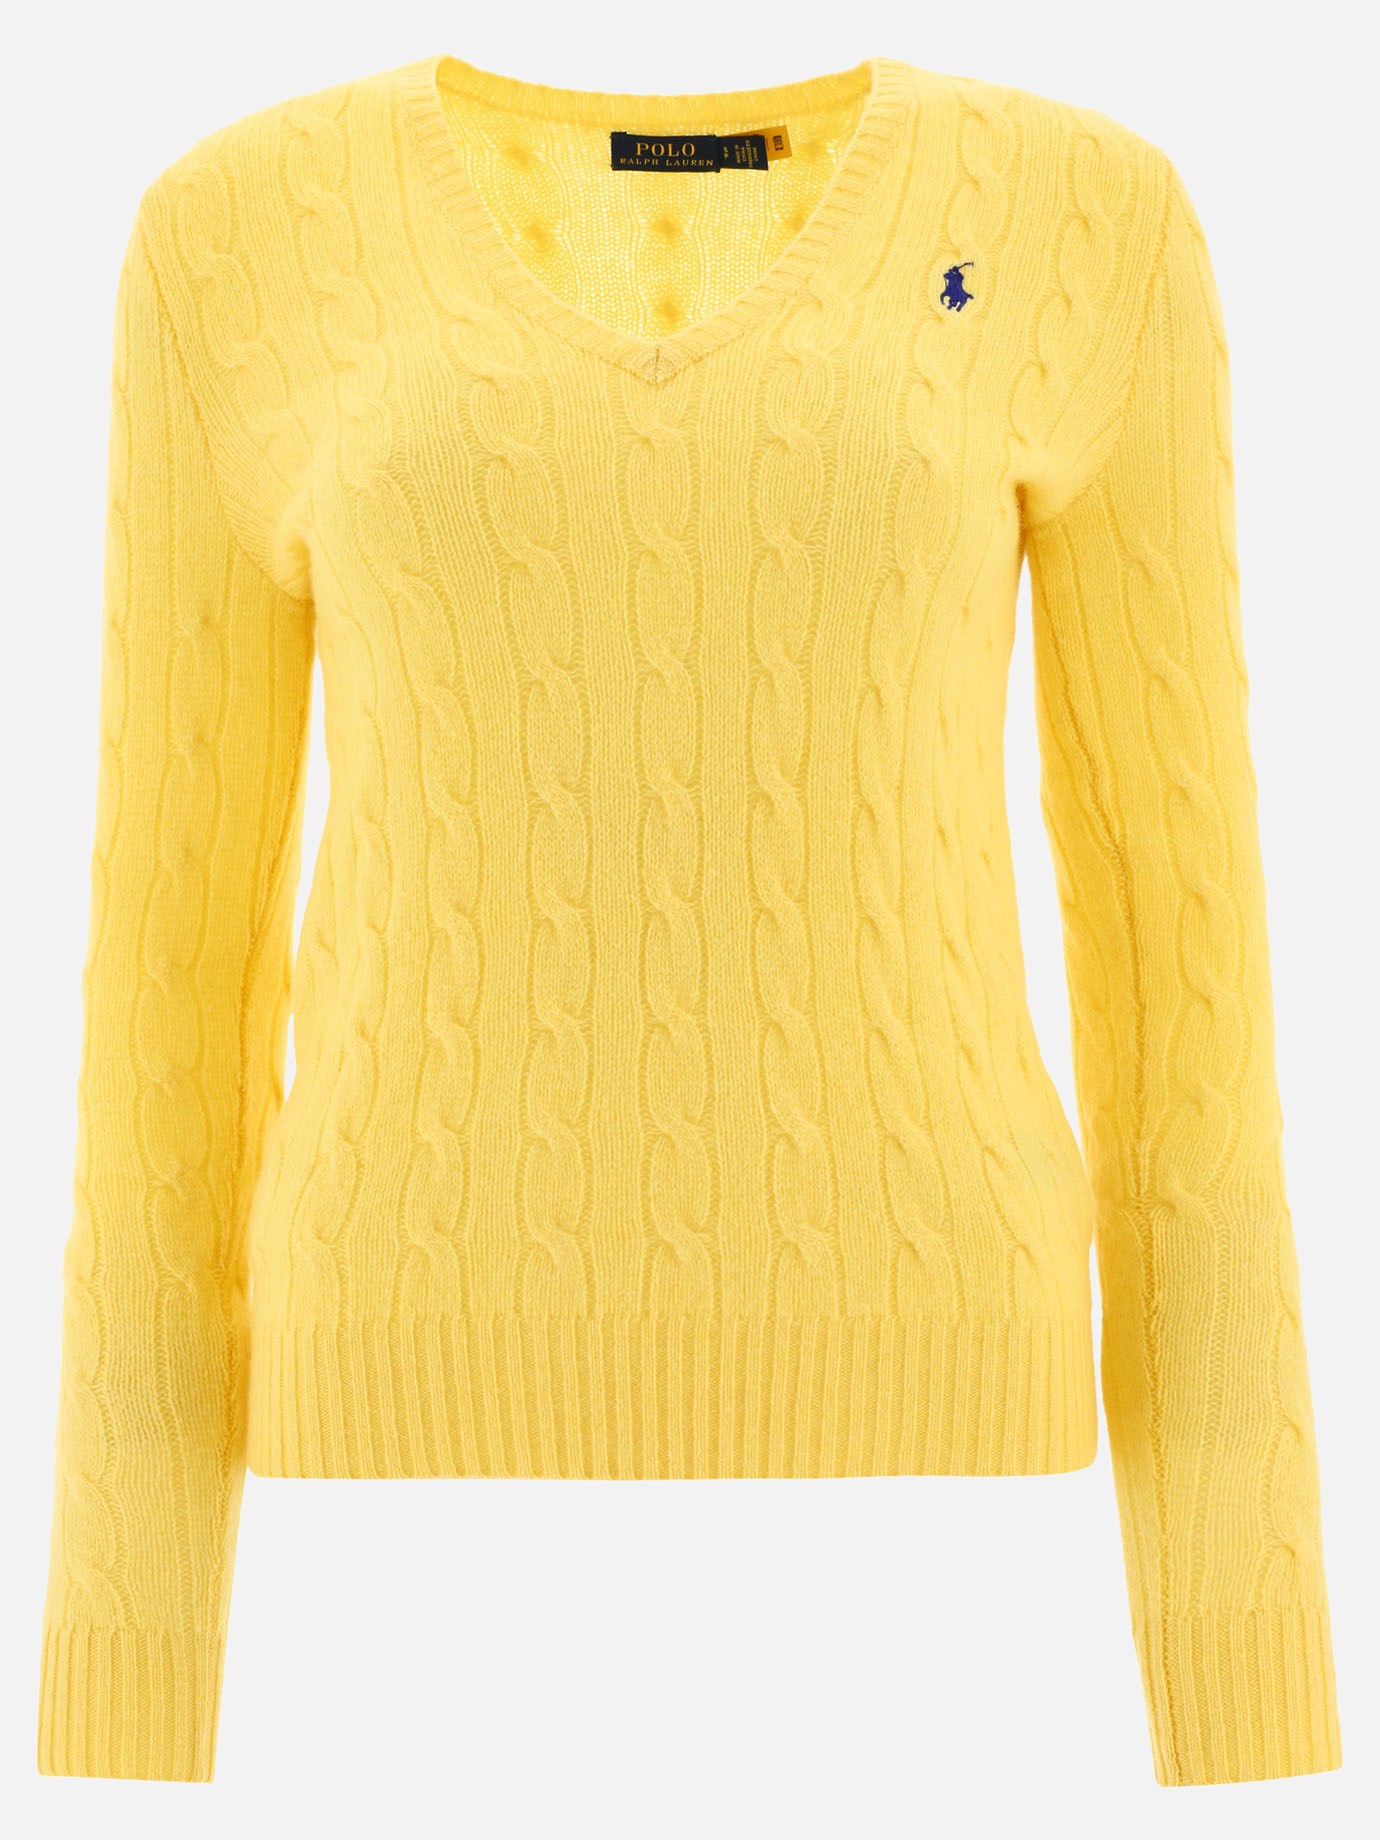  Pony  cable sweaterby Polo Ralph Lauren - 2